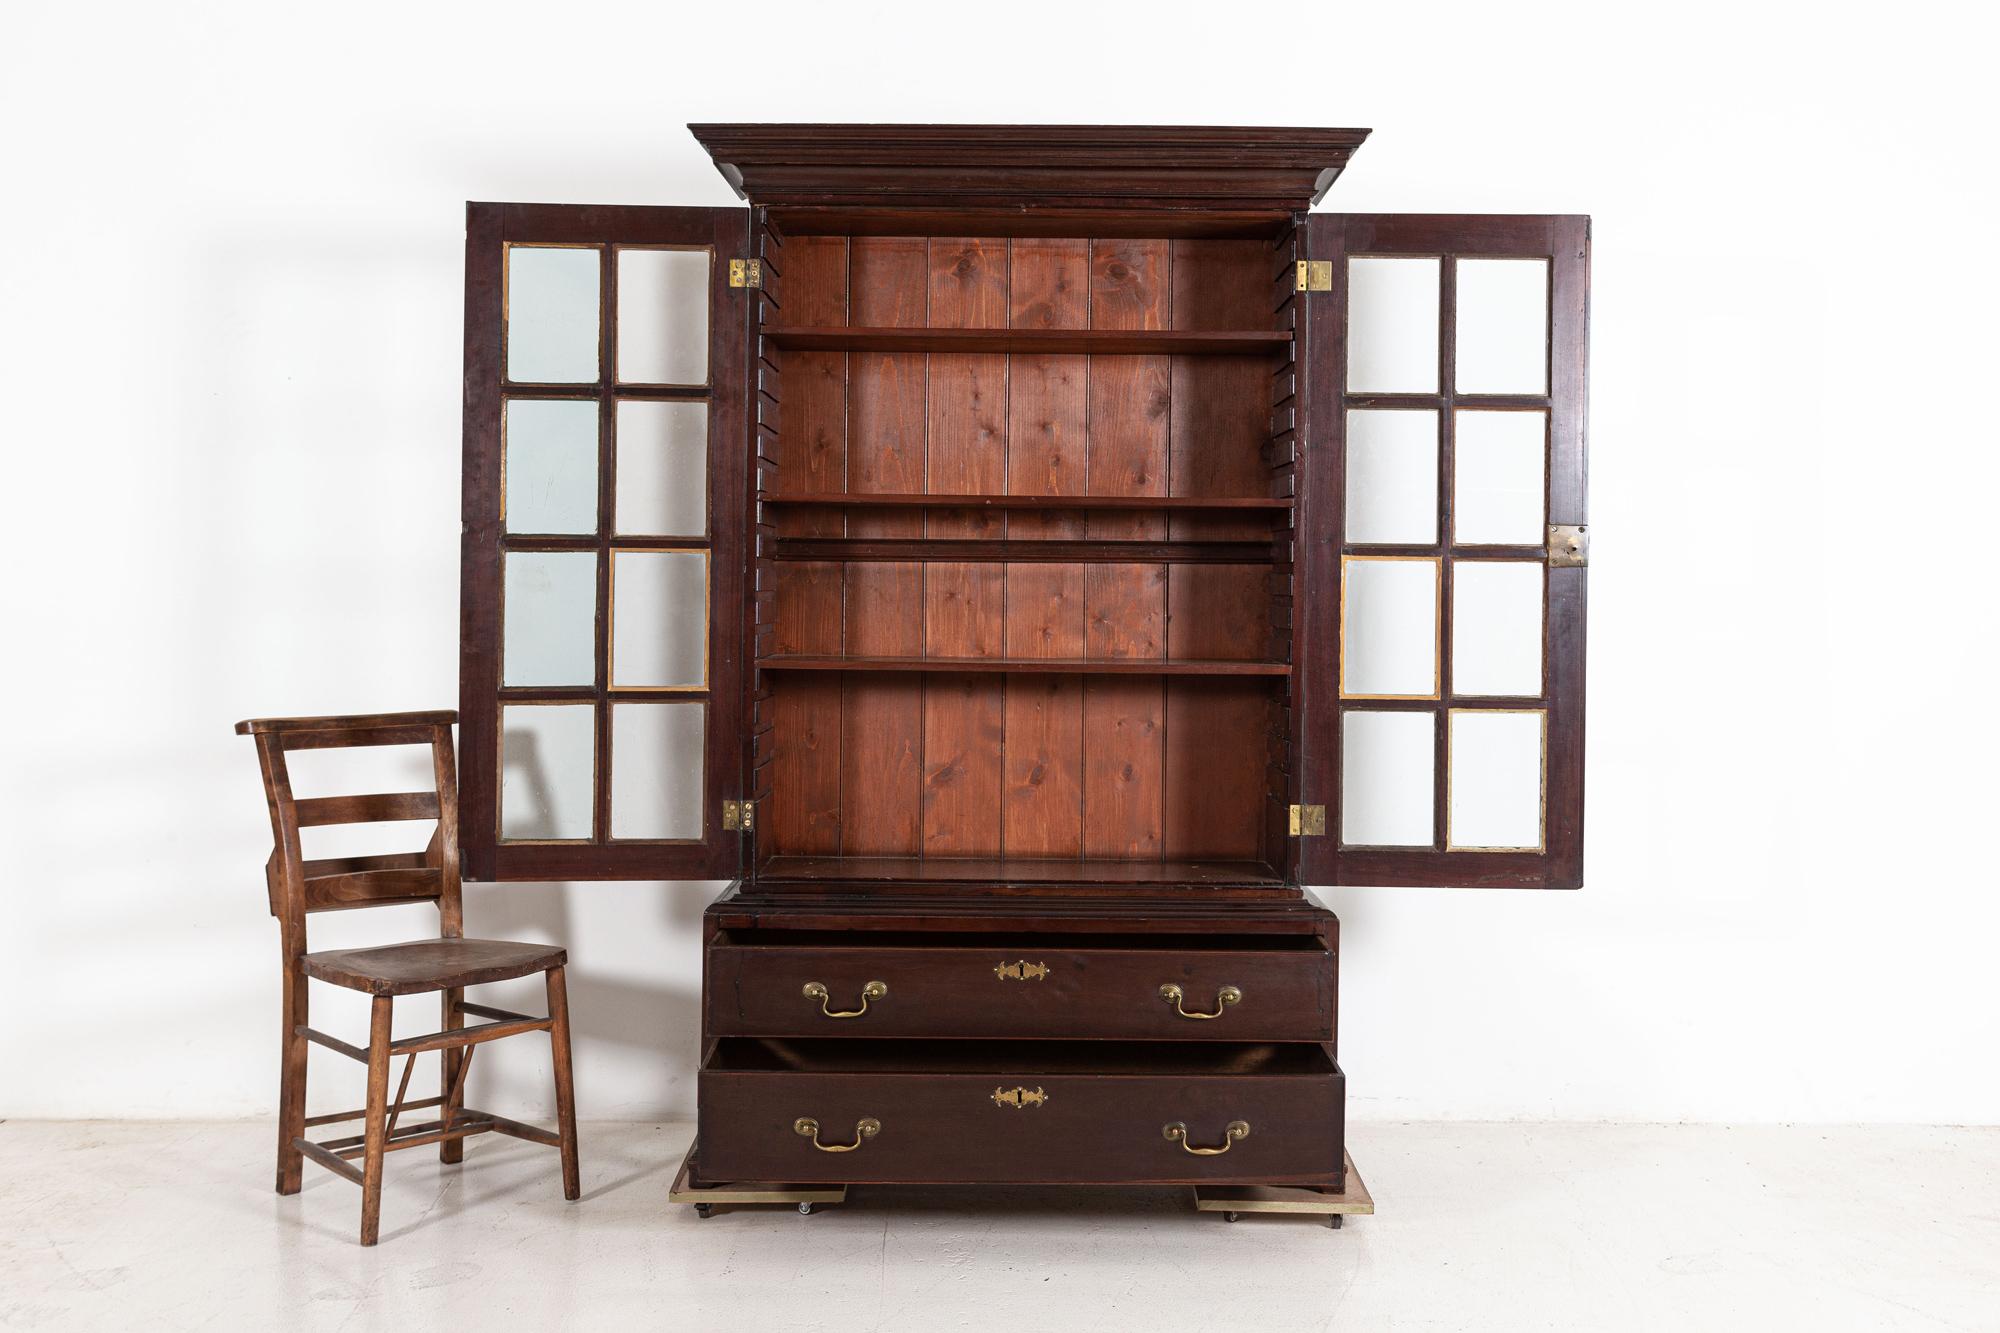 Early 19thC English Mahogany Glazed Bookcase In Good Condition For Sale In Staffordshire, GB